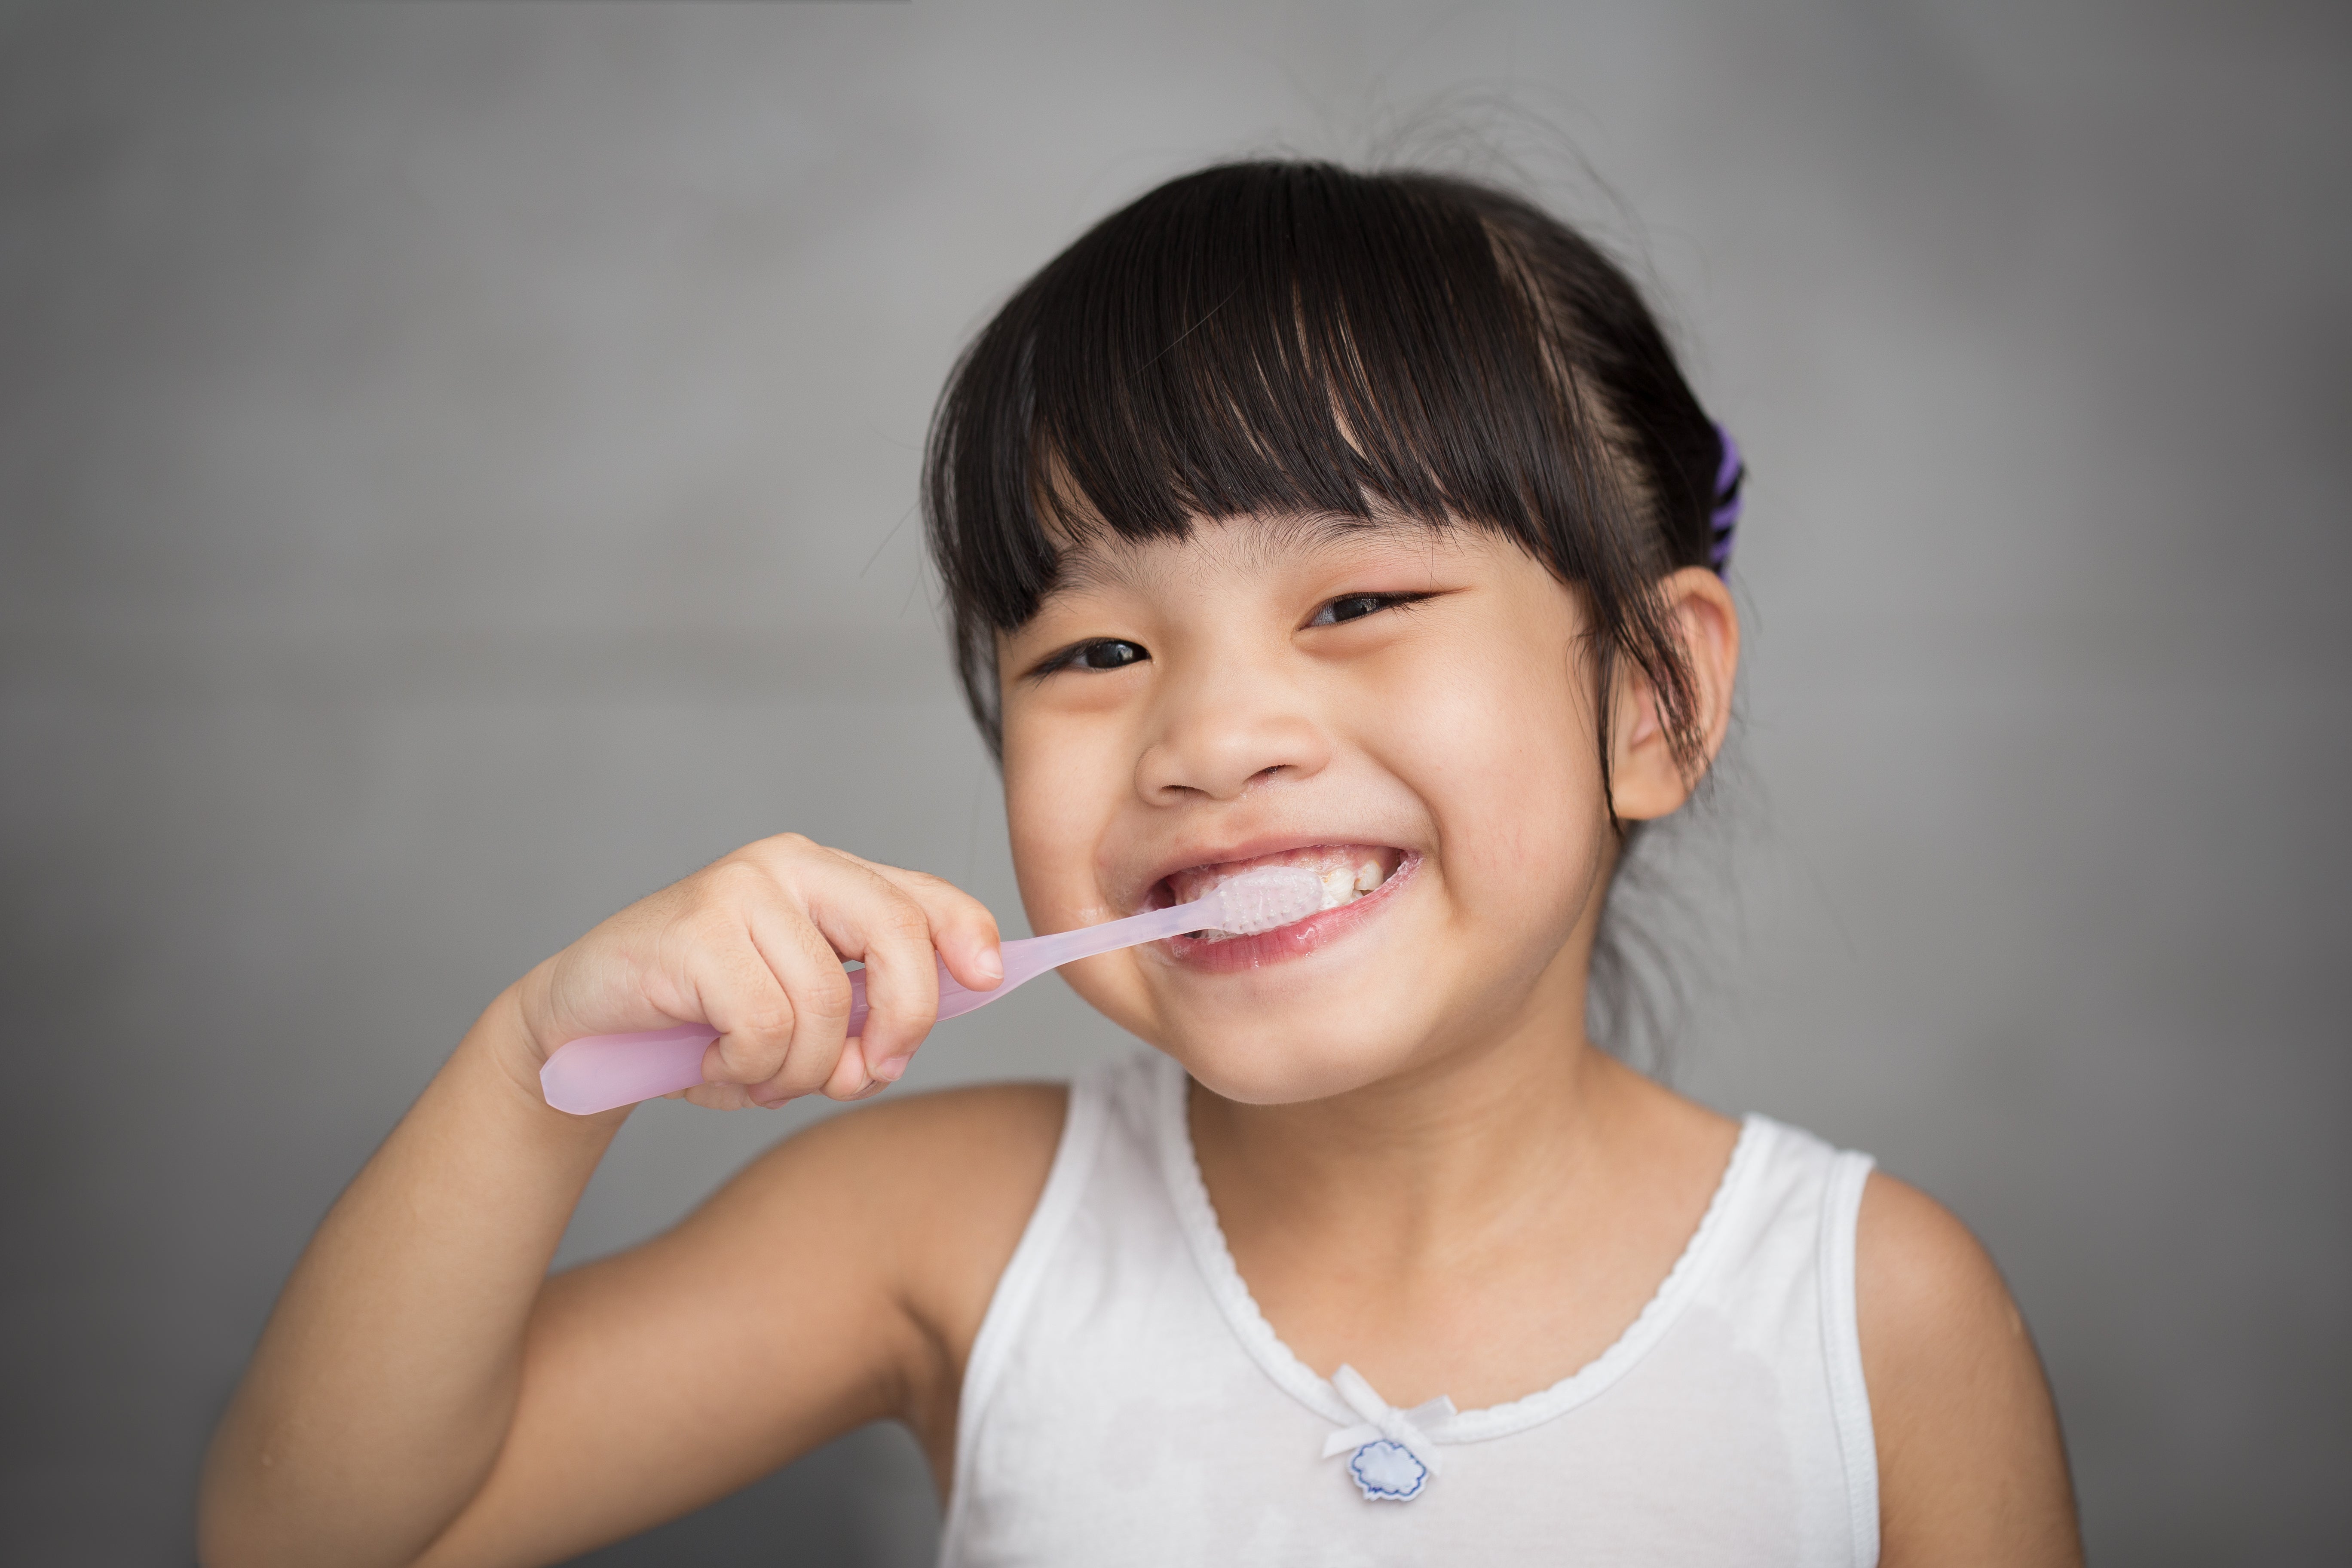 Healthy habits for healthy smiles: tips for keeping your kids’ teeth, mouth and gums in